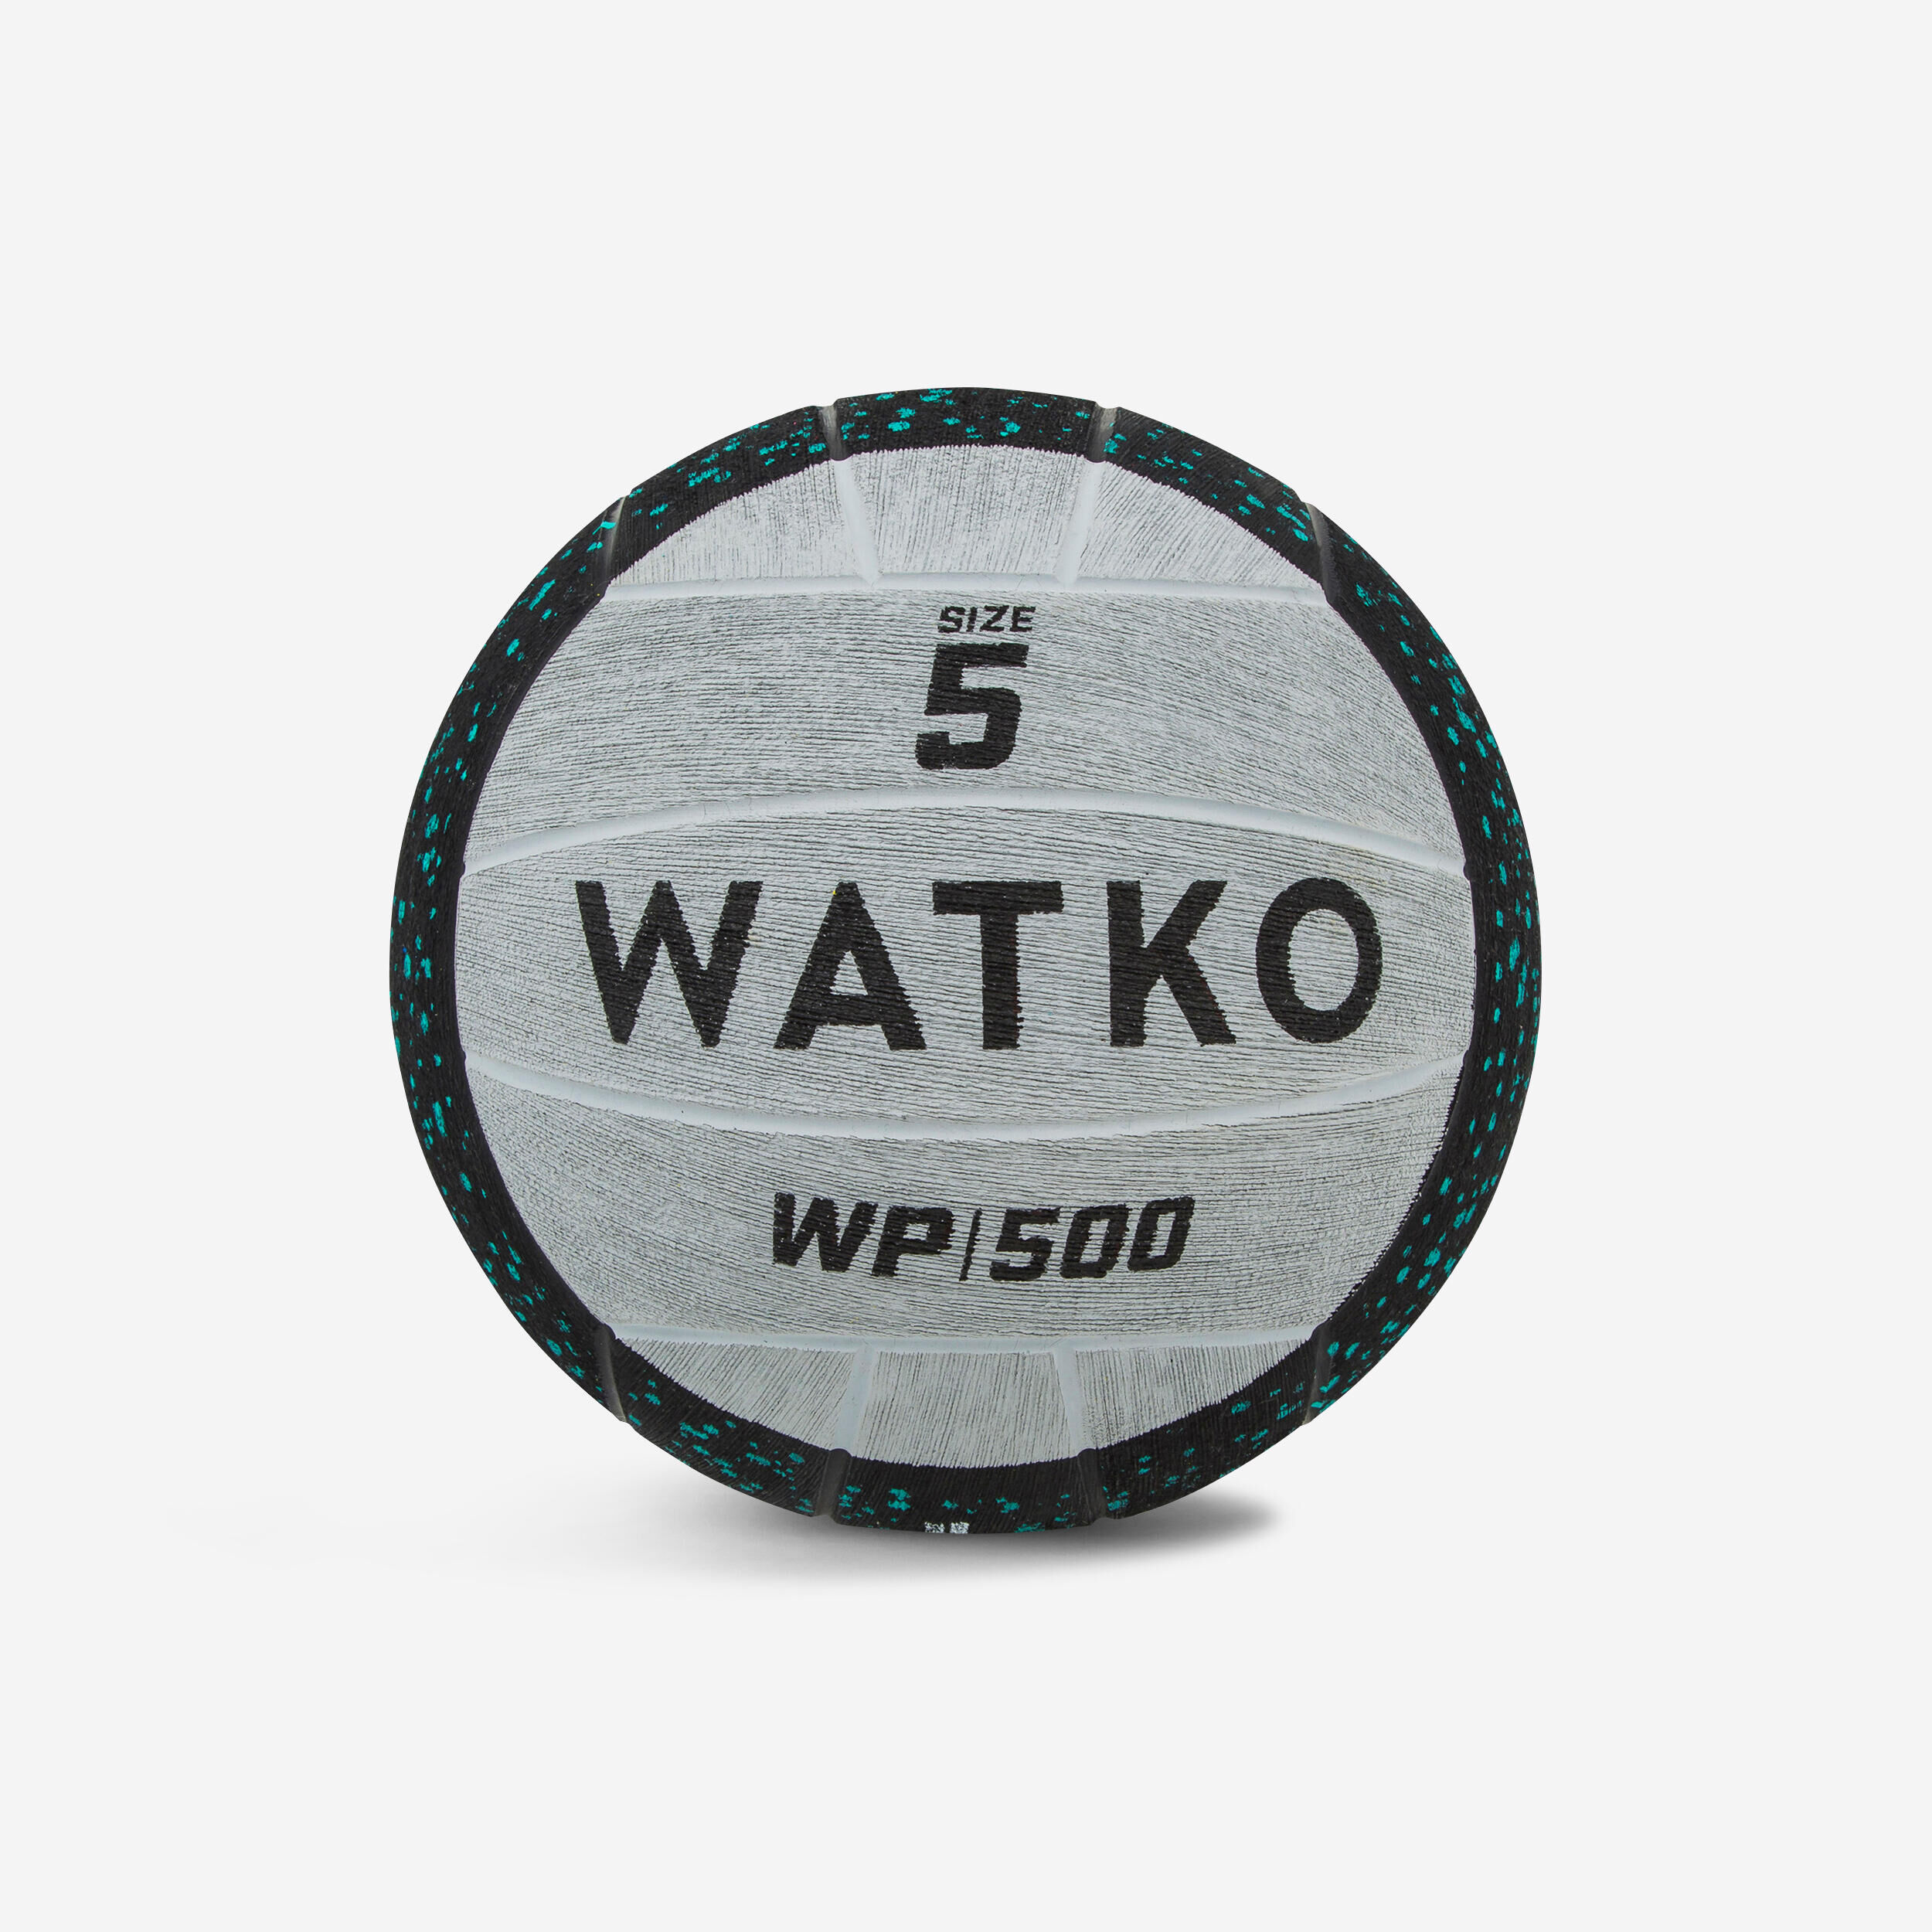 WATKO WEIGHTED WATER POLO BALL WP500 1KG SIZE 5